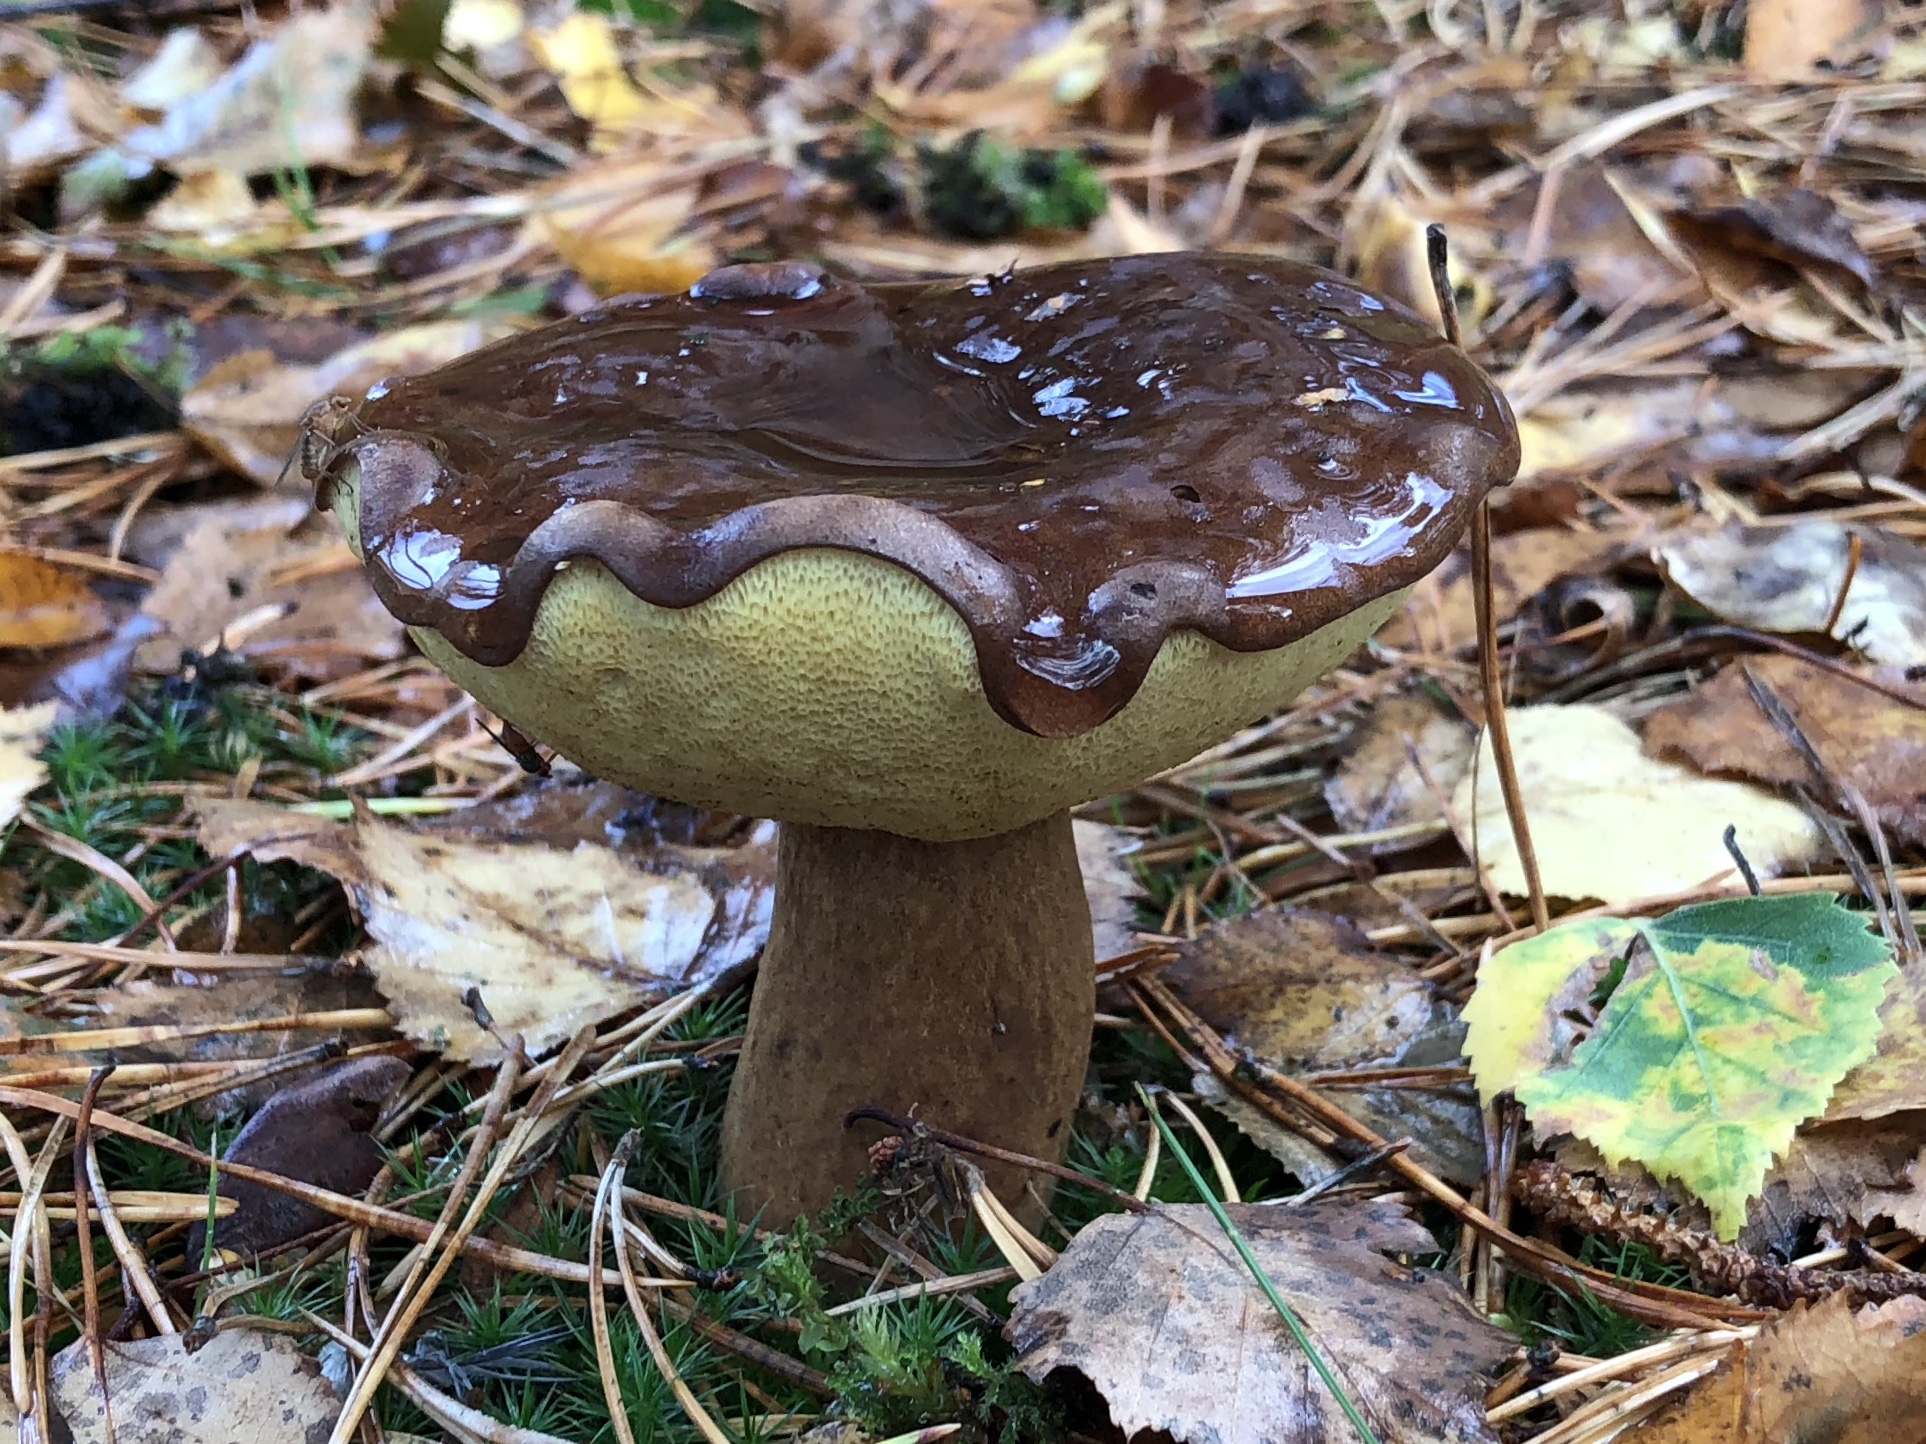 This fungus looks like a chocolate covered donut... : mildlyinteresting